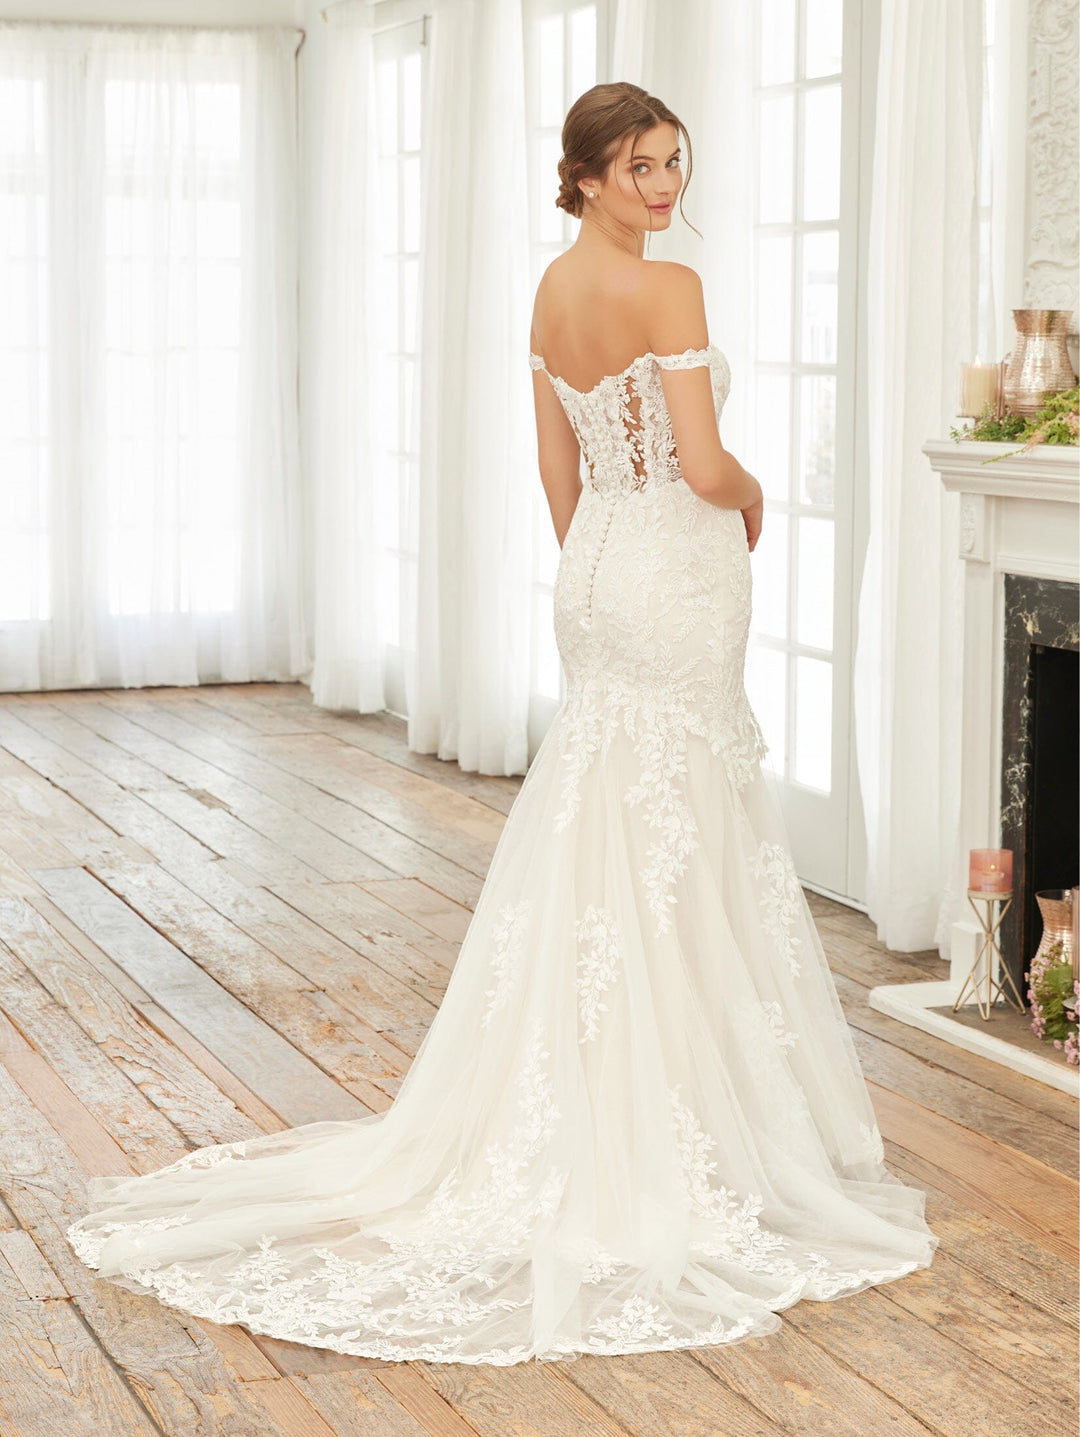 Lace Off Shoulder Bridal Gown by Adrianna Papell 31249